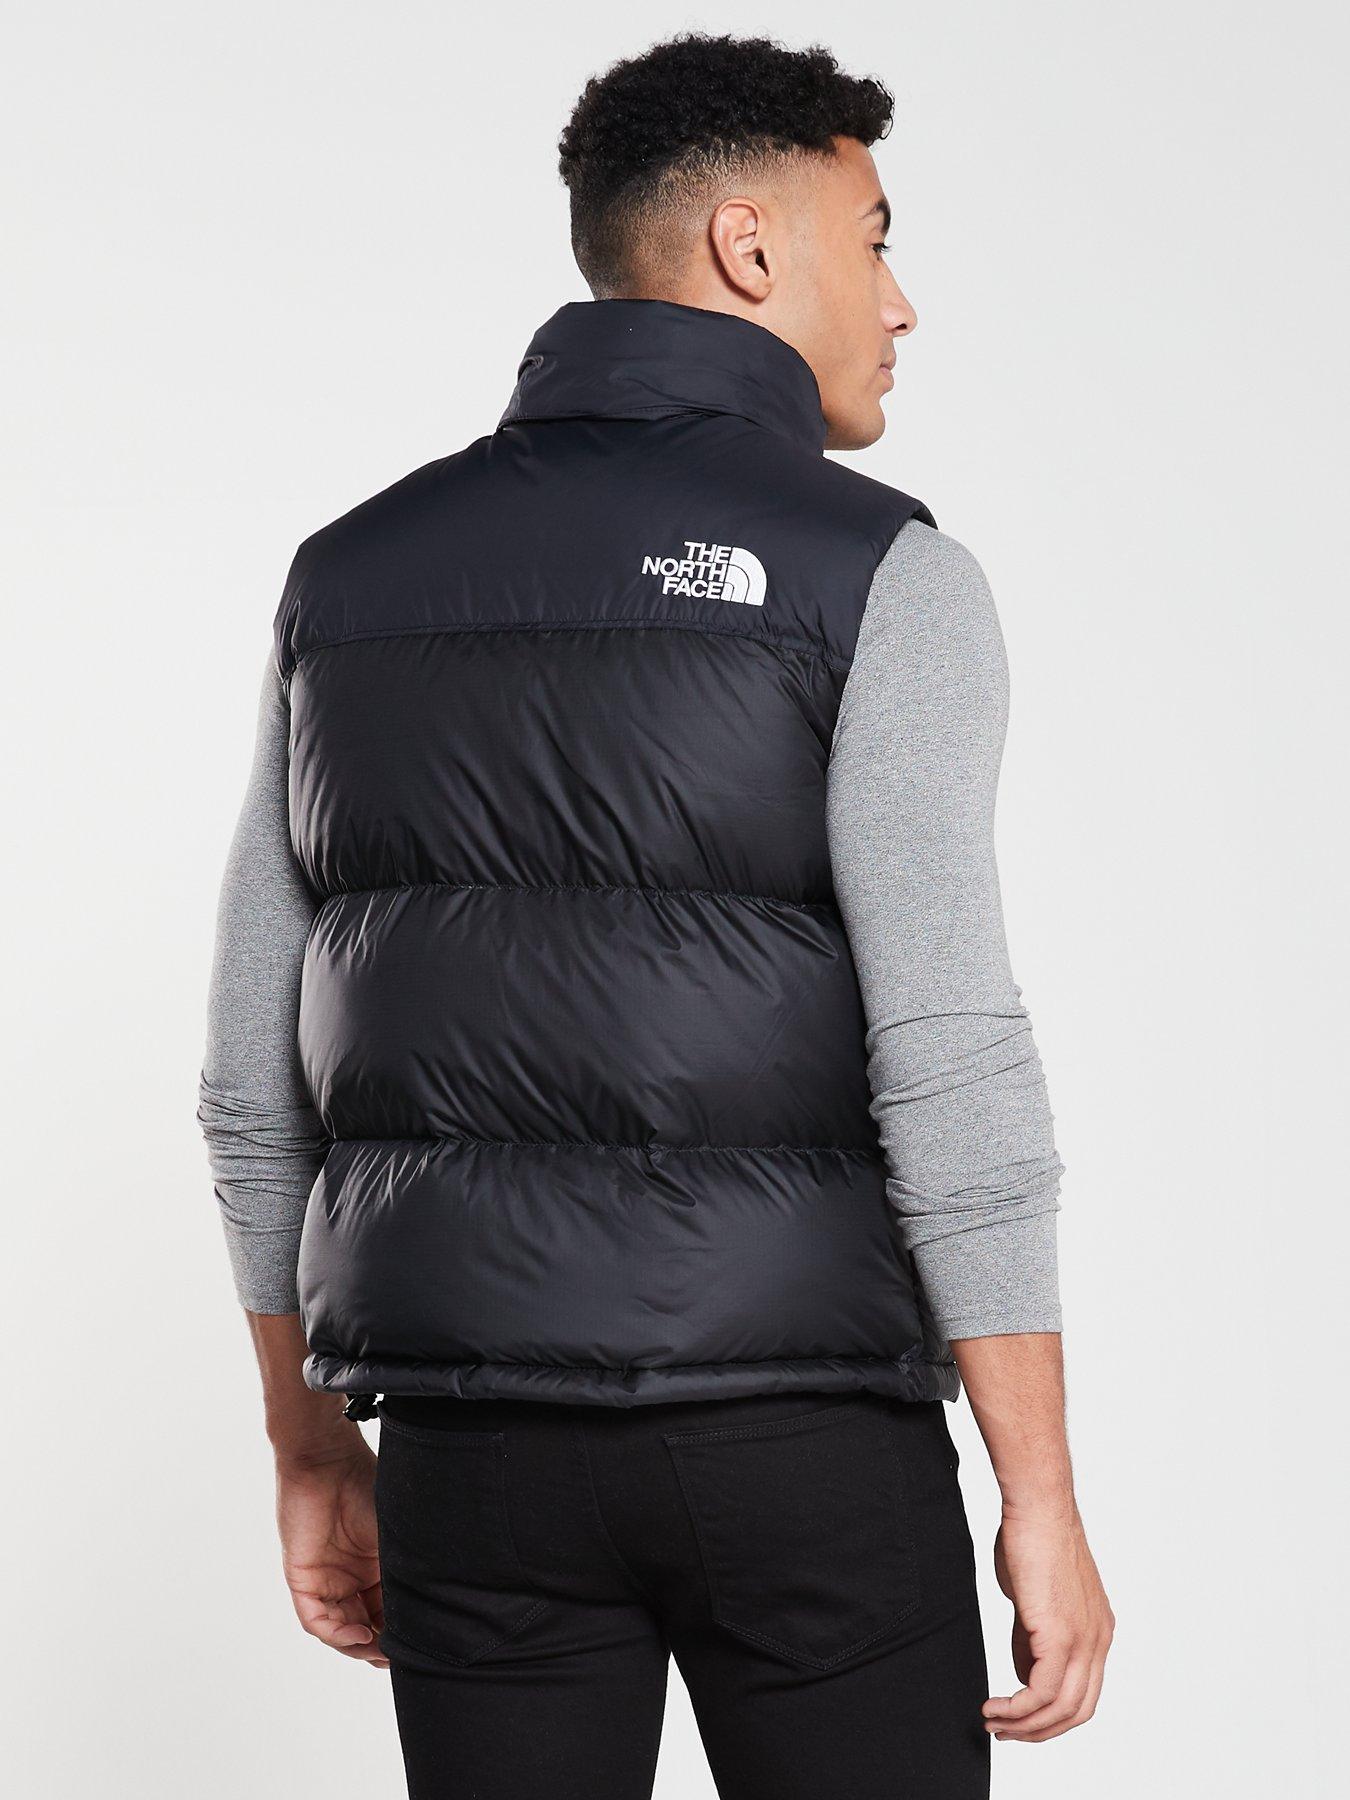 the north face gilet black